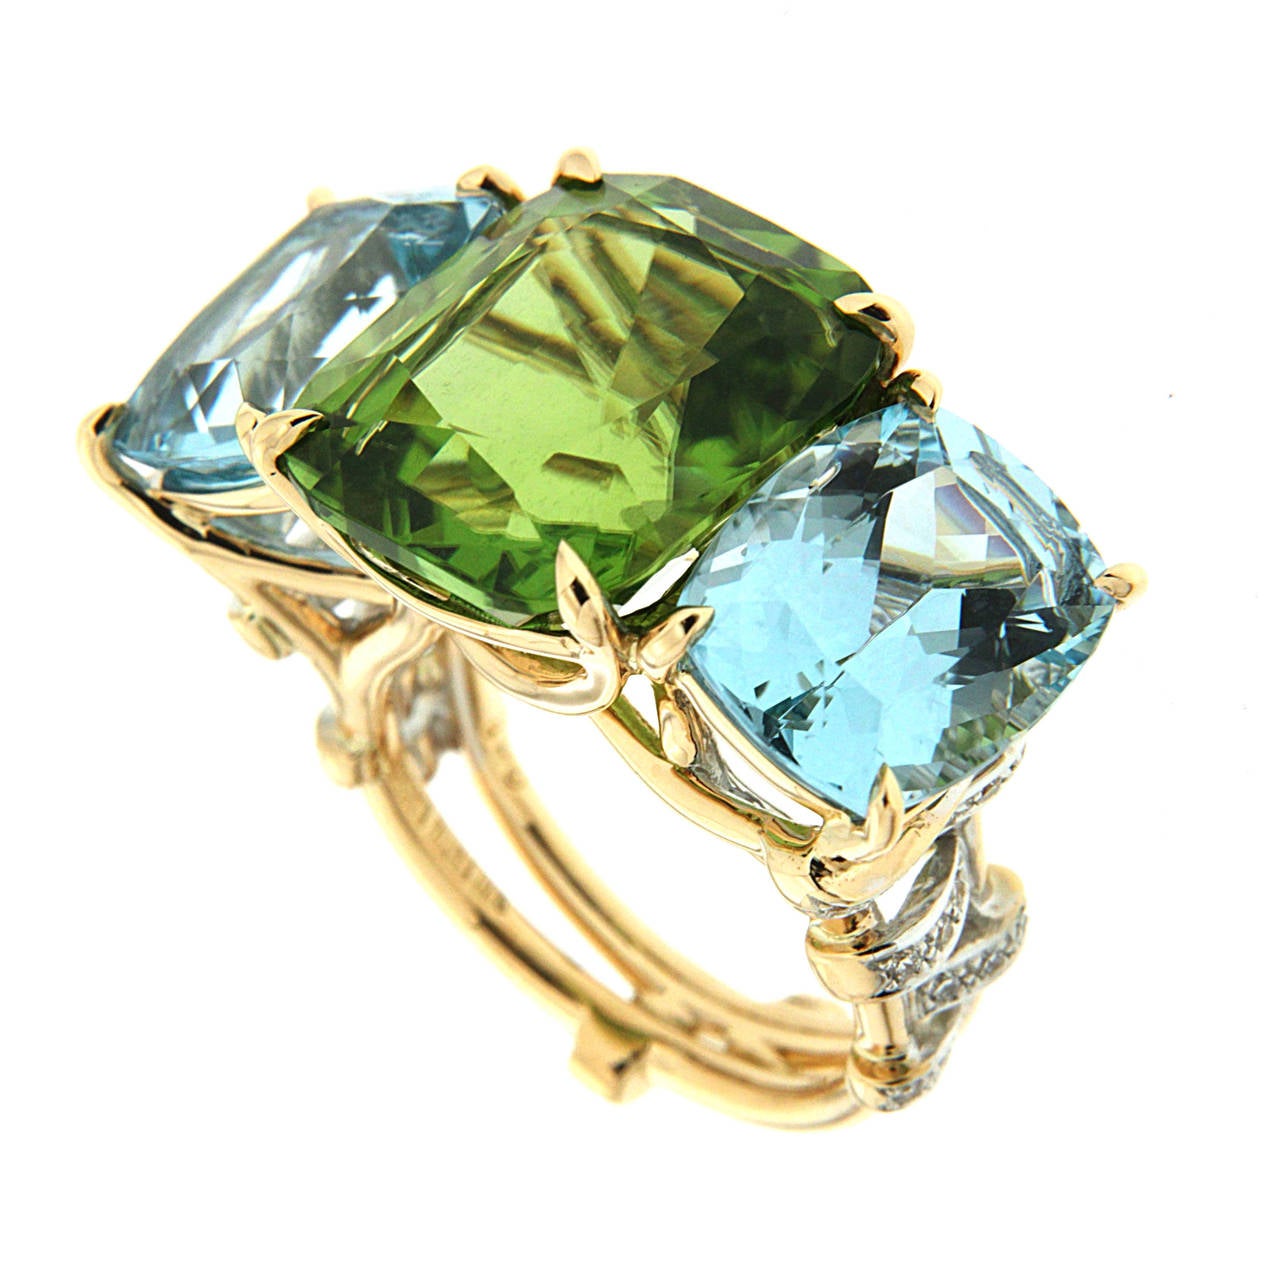 This ring features 10.59ct Cushion Peridot Center and aquamarines as side stones. The shank has diamond straps as decorations. This ring is made in 18kt Yellow Gold.